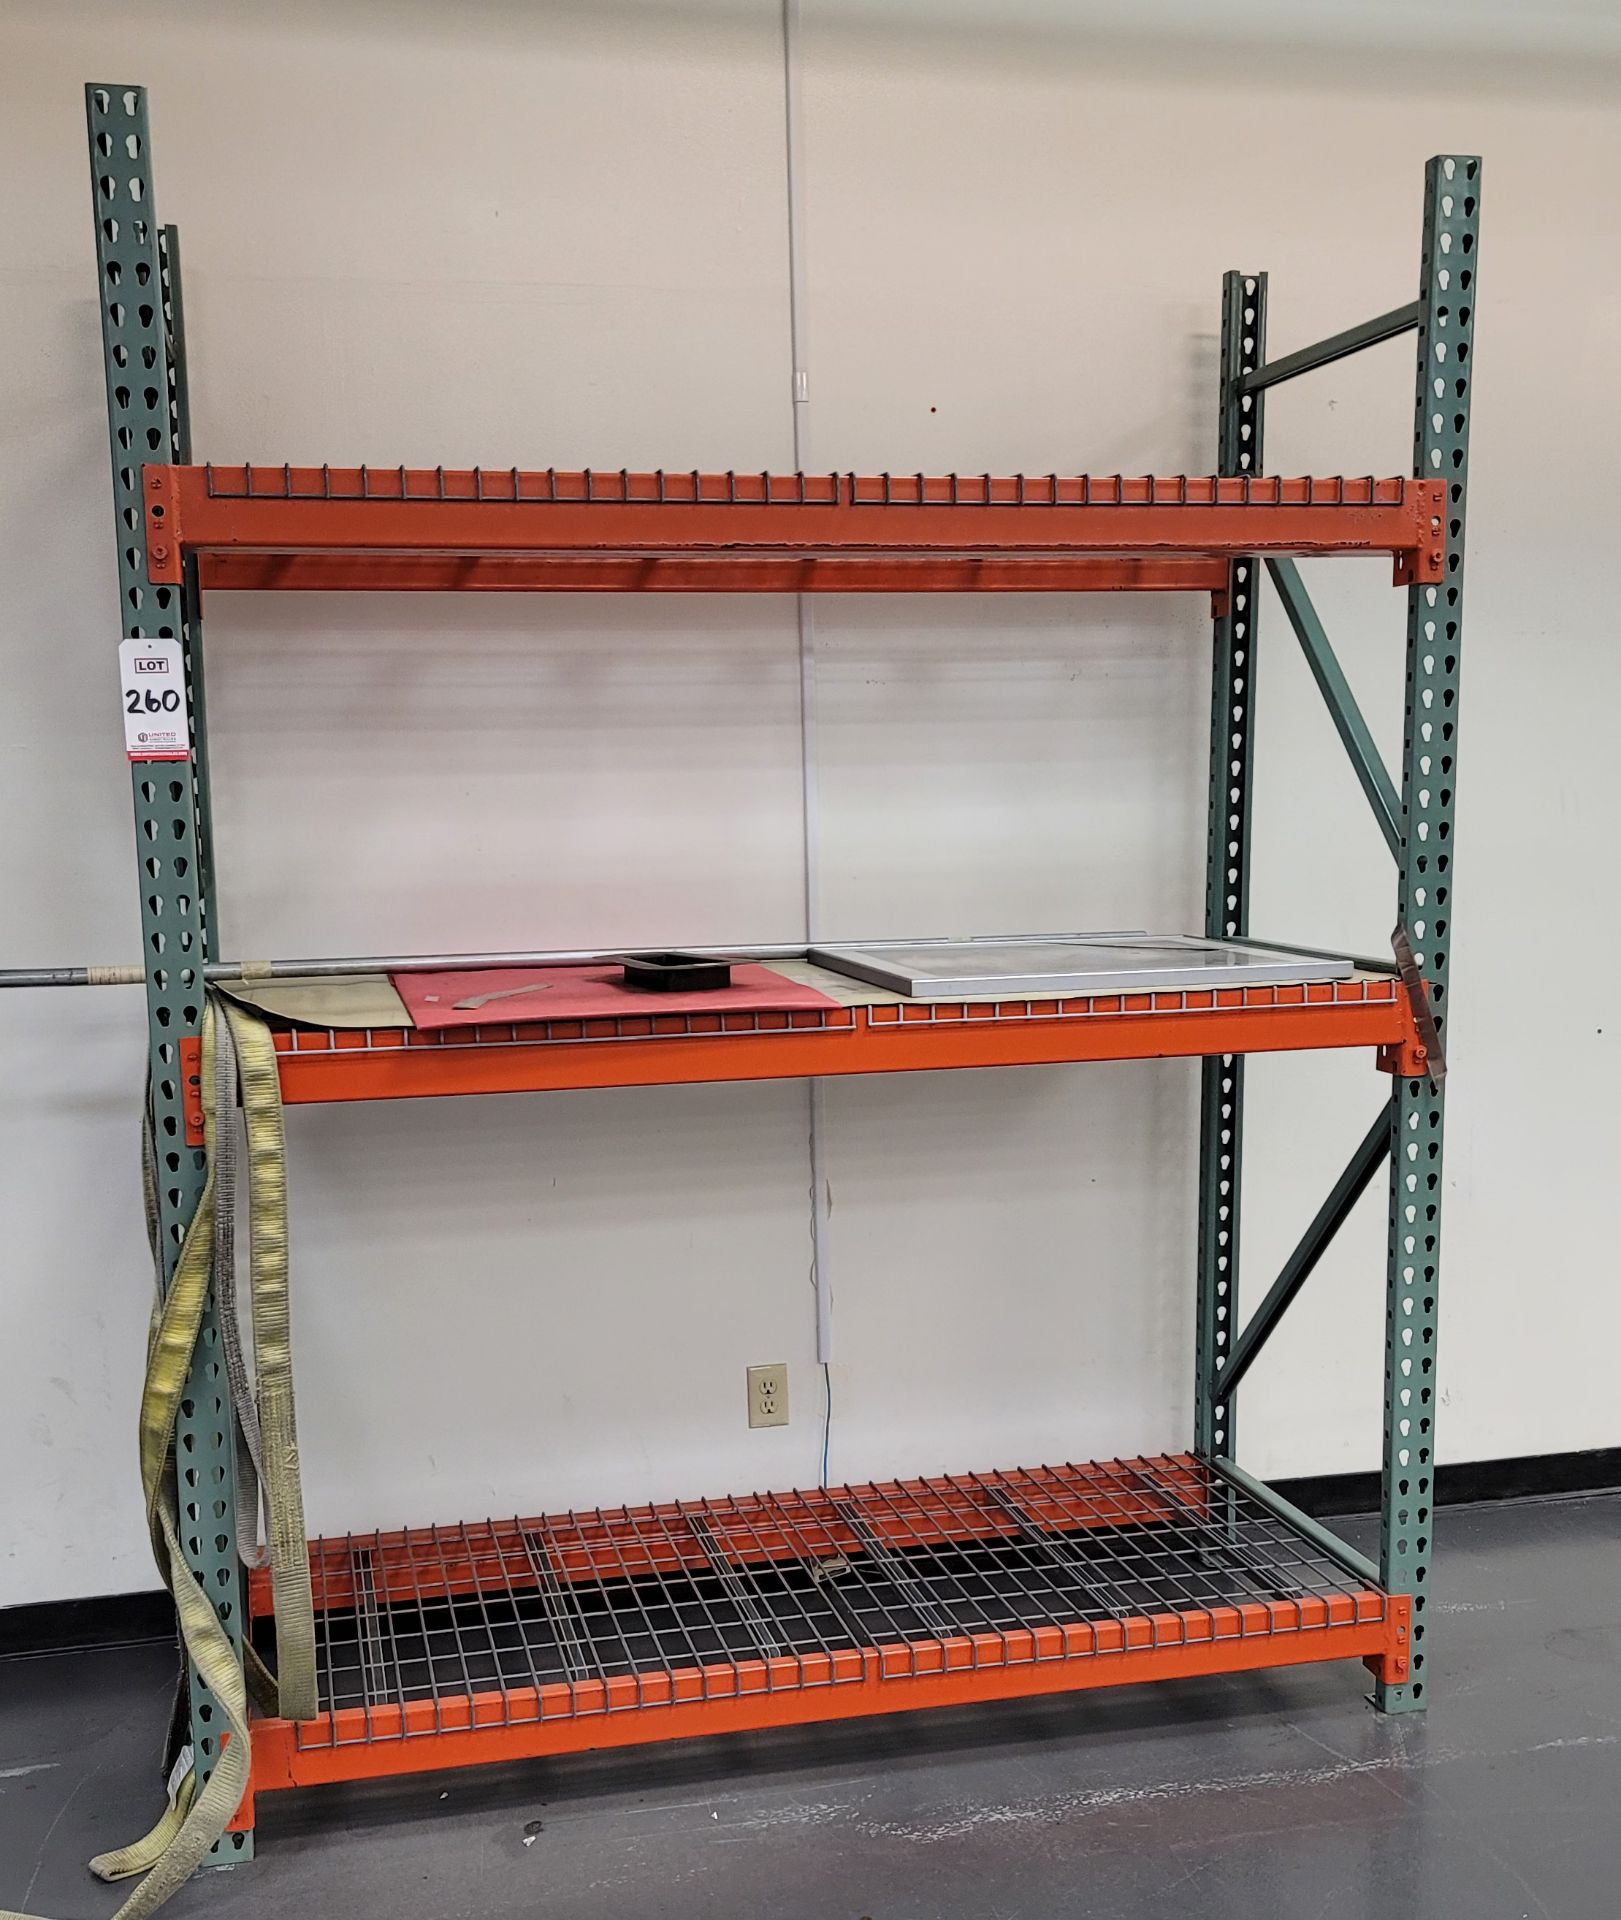 LOT - (1) SECTION PALLET RACK, 6'-6" BEAMS, 8' UPRIGHTS, WIRE DECKING (LOCATION: BUILDING 1 & 2